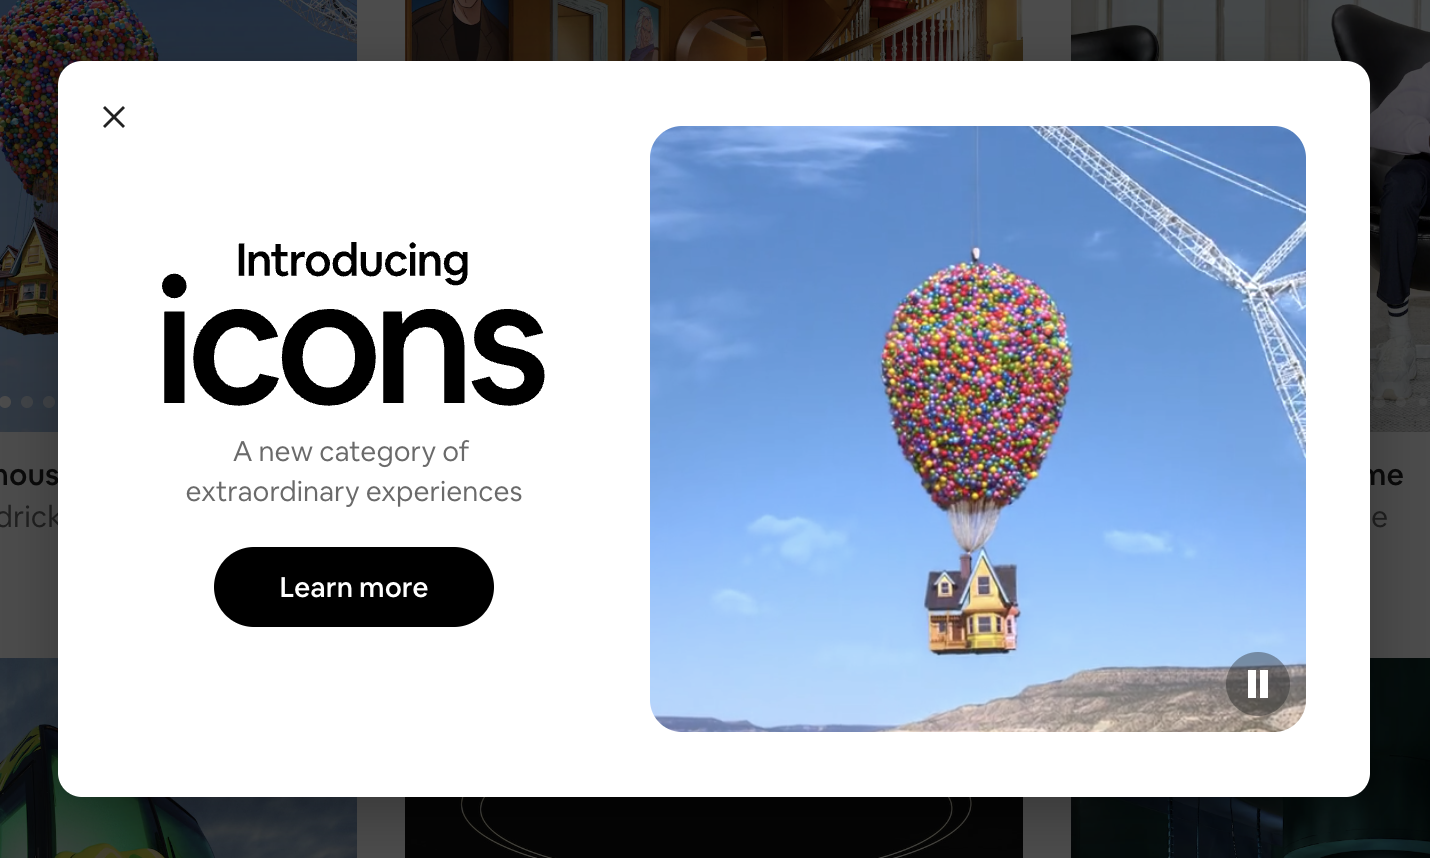 airbnb-icons - Extraordinary experiences from the world’s greatest icons